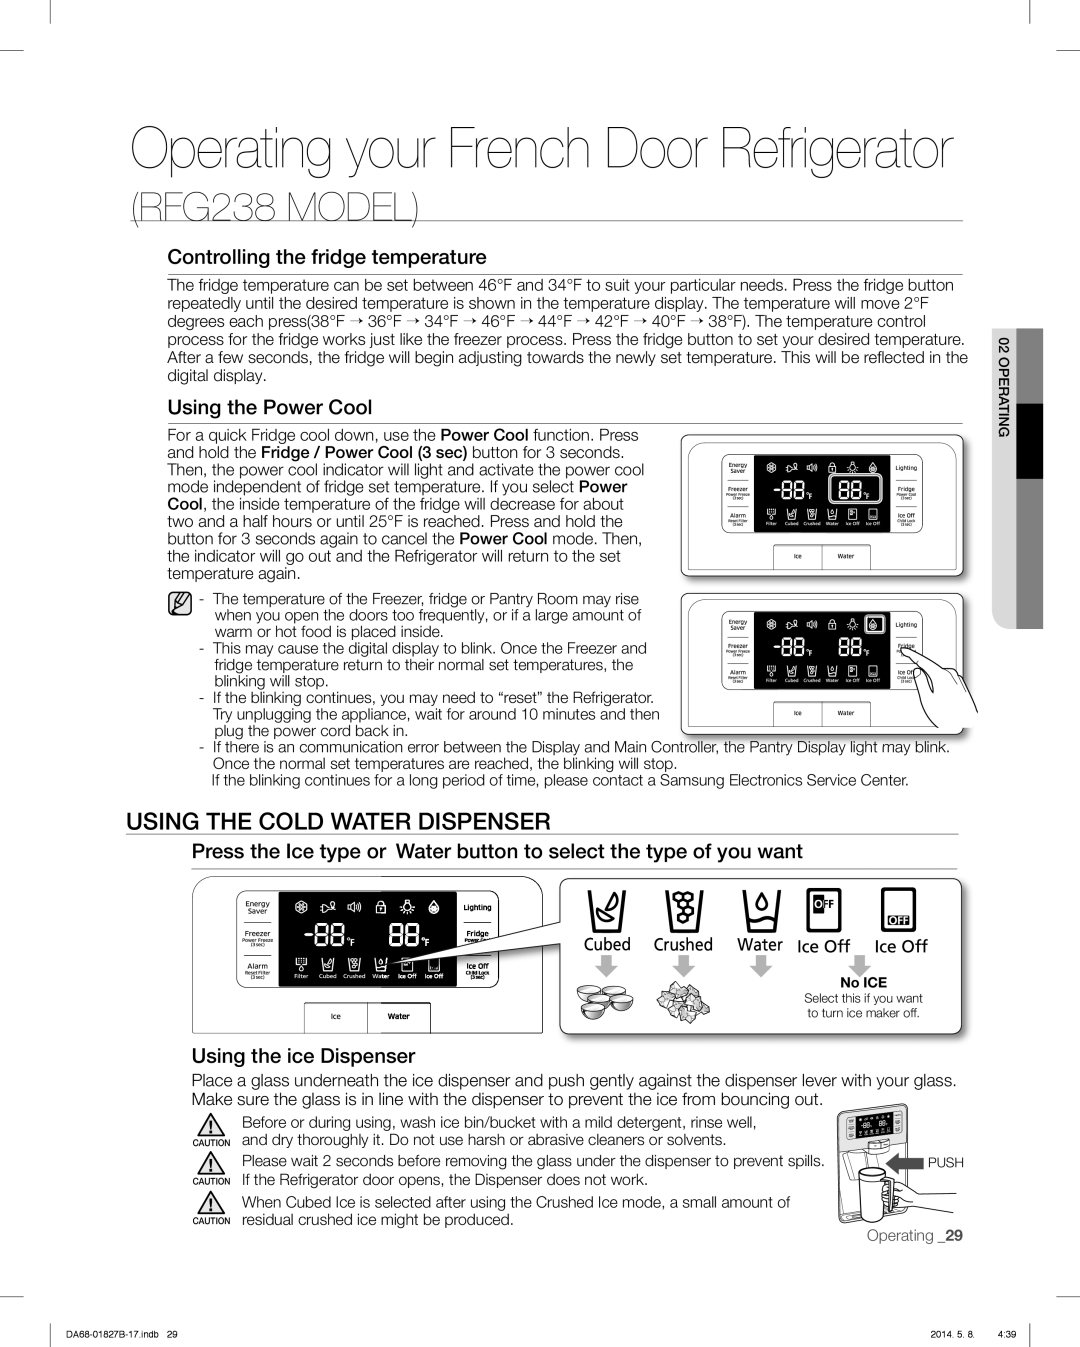 Samsung RFG237AABP, RFG237AARS Operating your French Door Refrigerator, RFG238 MODEL, Using The Cold Water Dispenser 